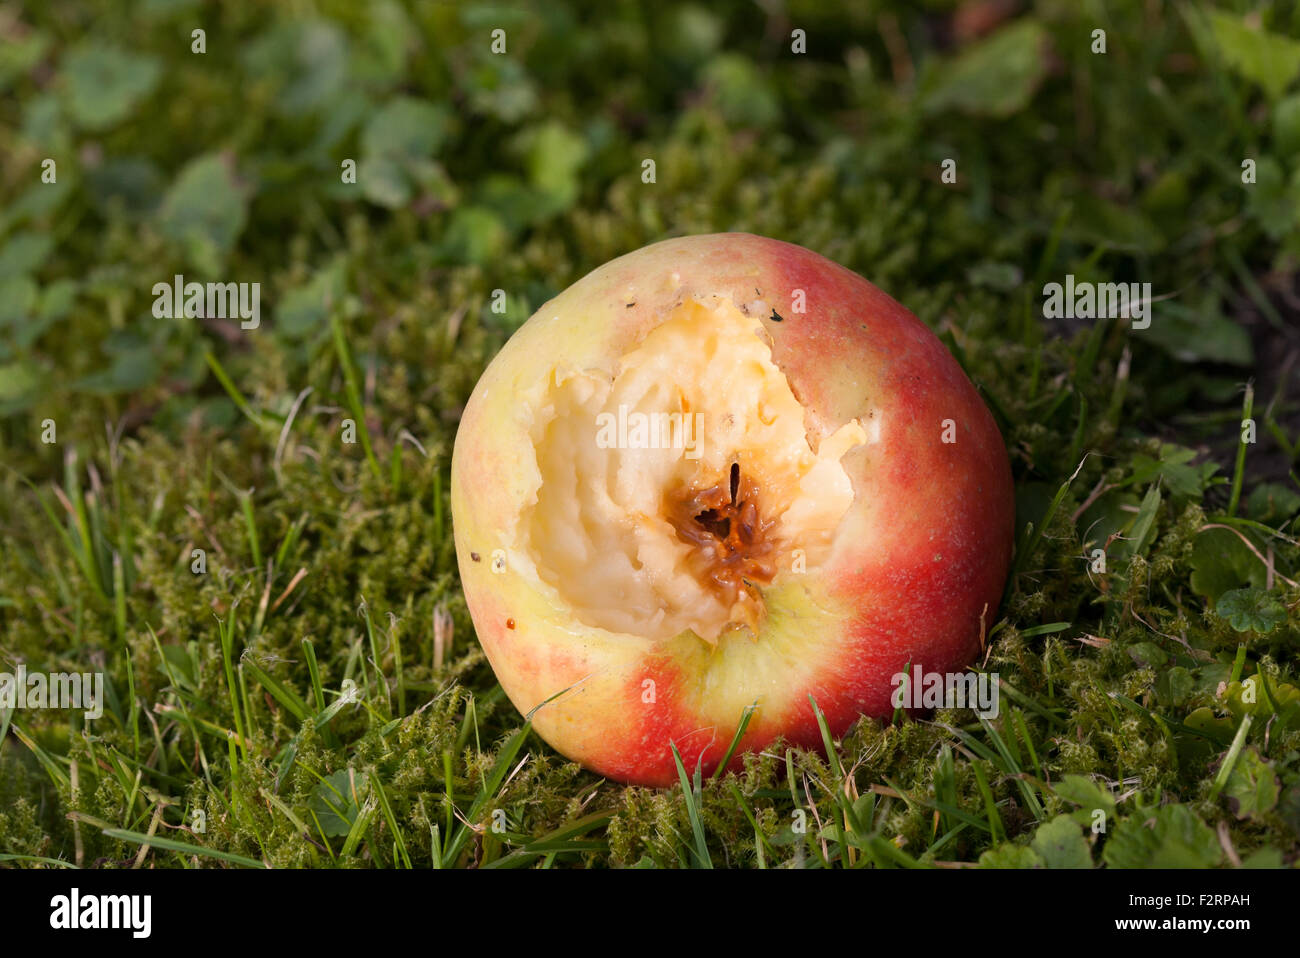 Fallen apple partially eaten by insects Stock Photo